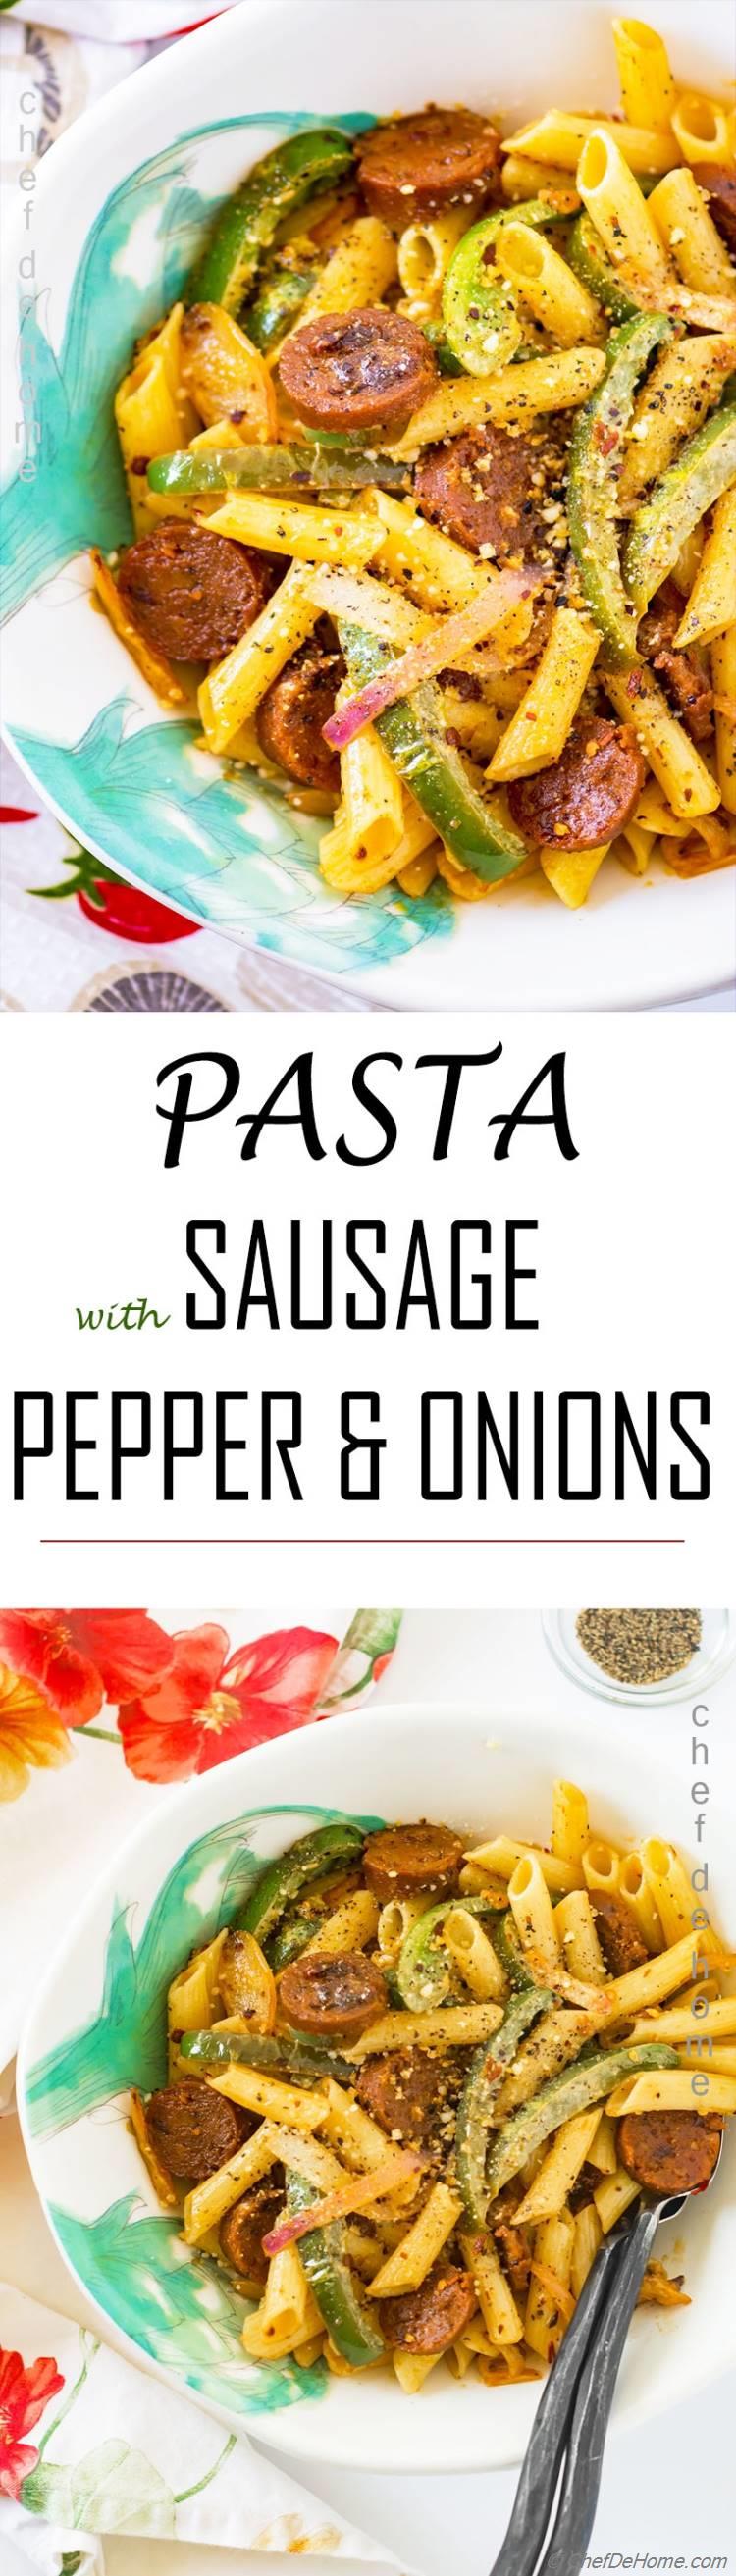 Serve an easy pasta dinner with curizo sausage peppers and onions